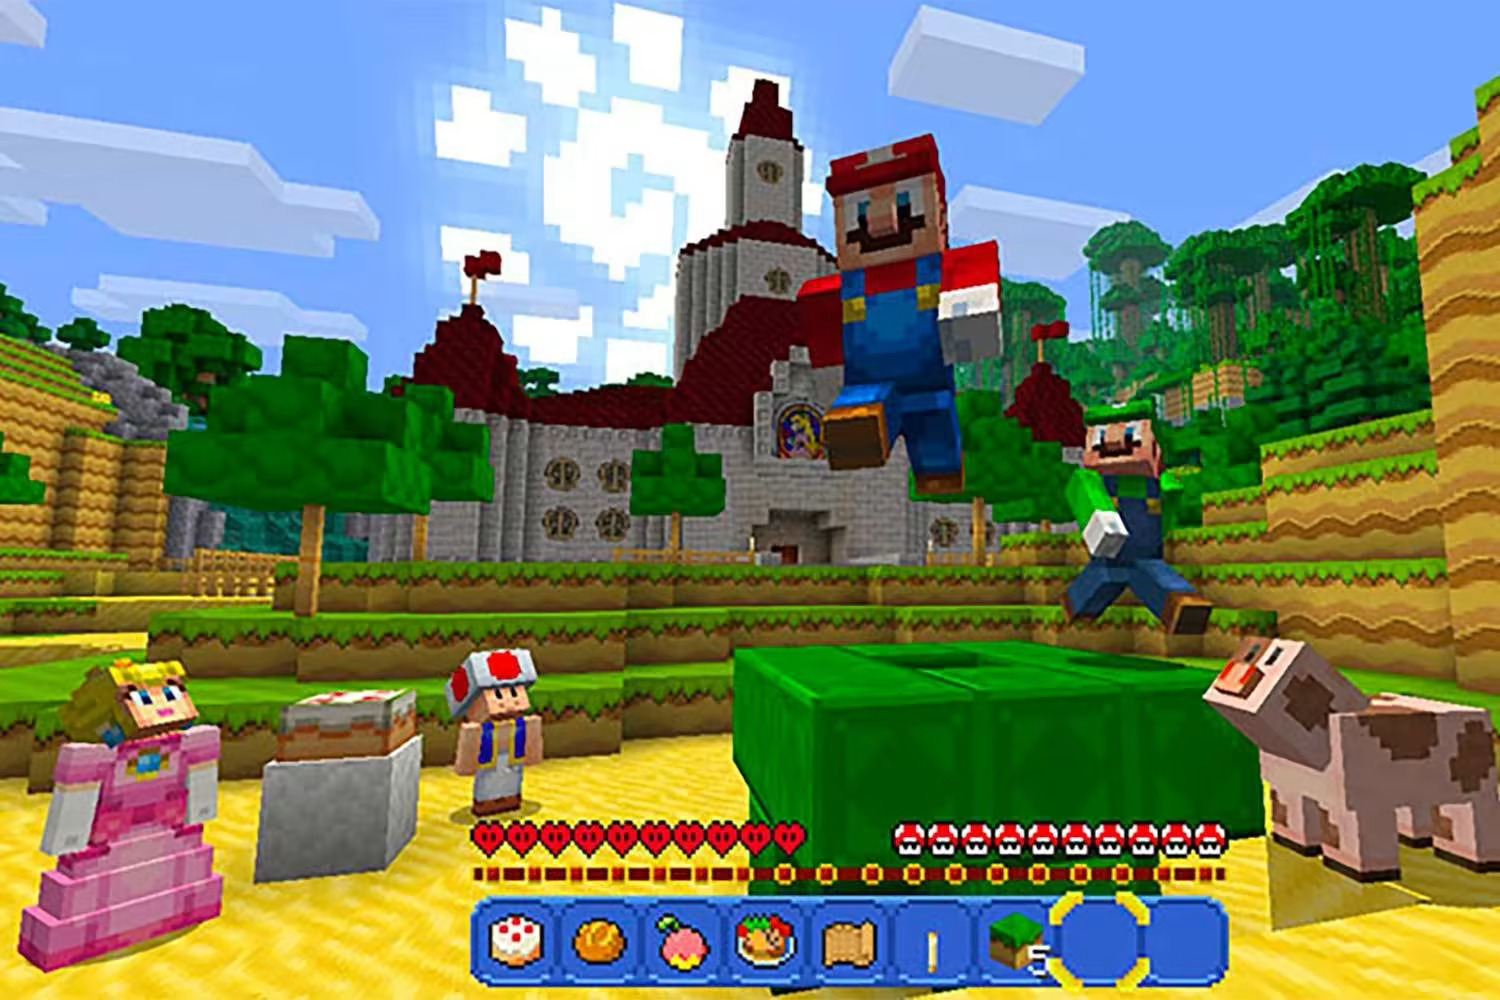 Minecraft's release date and details about its early version